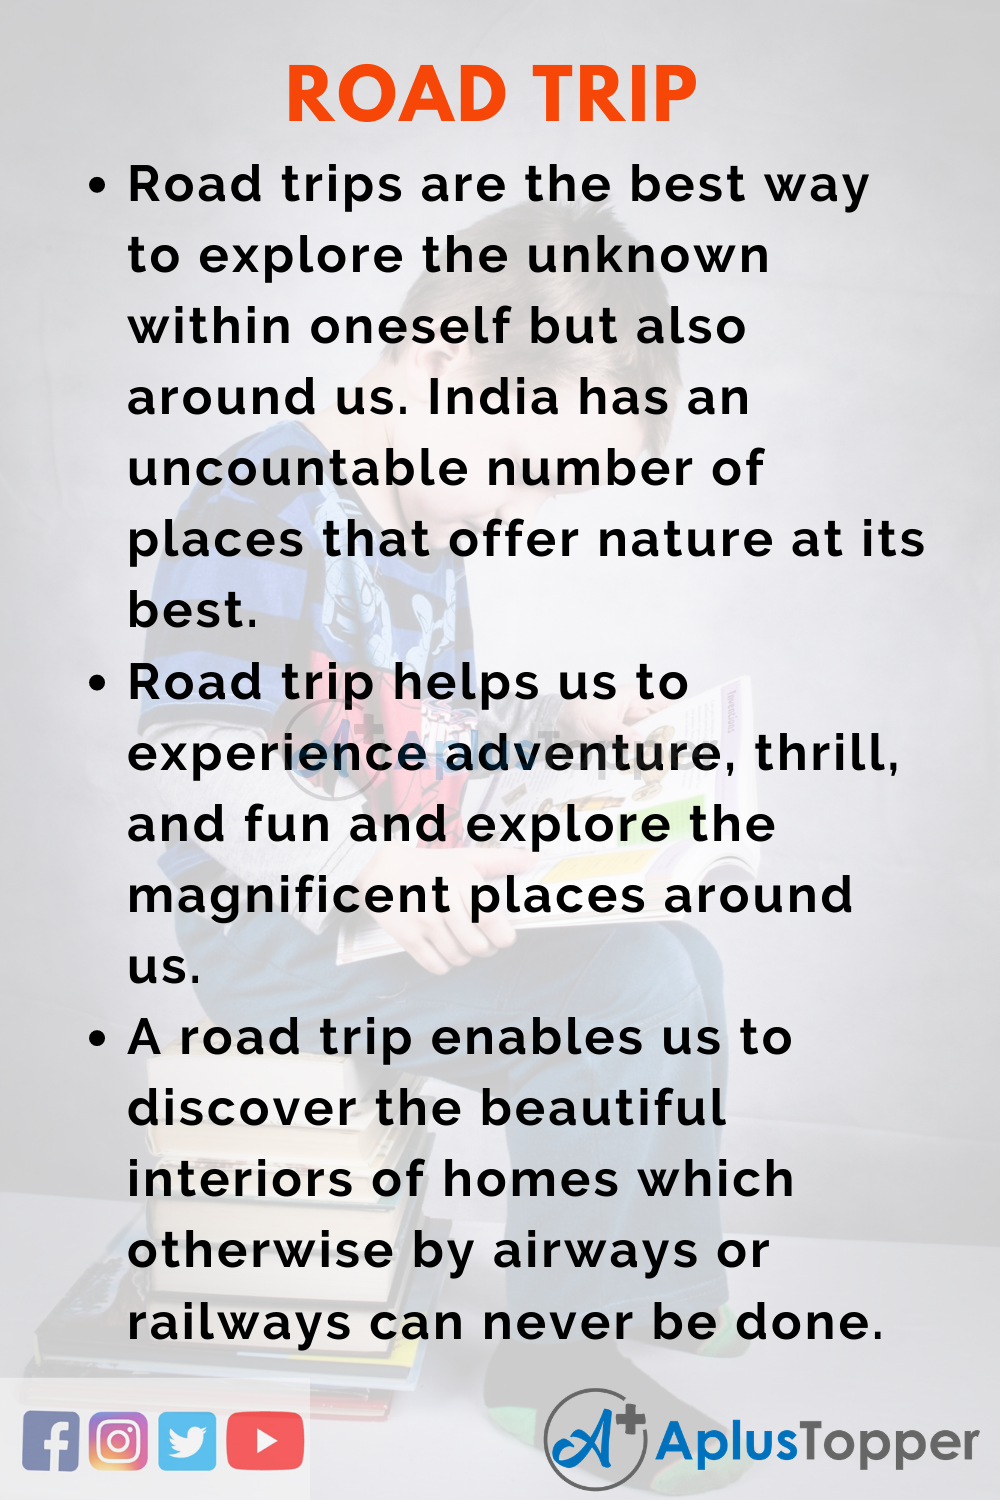 essay on road trip for class 5